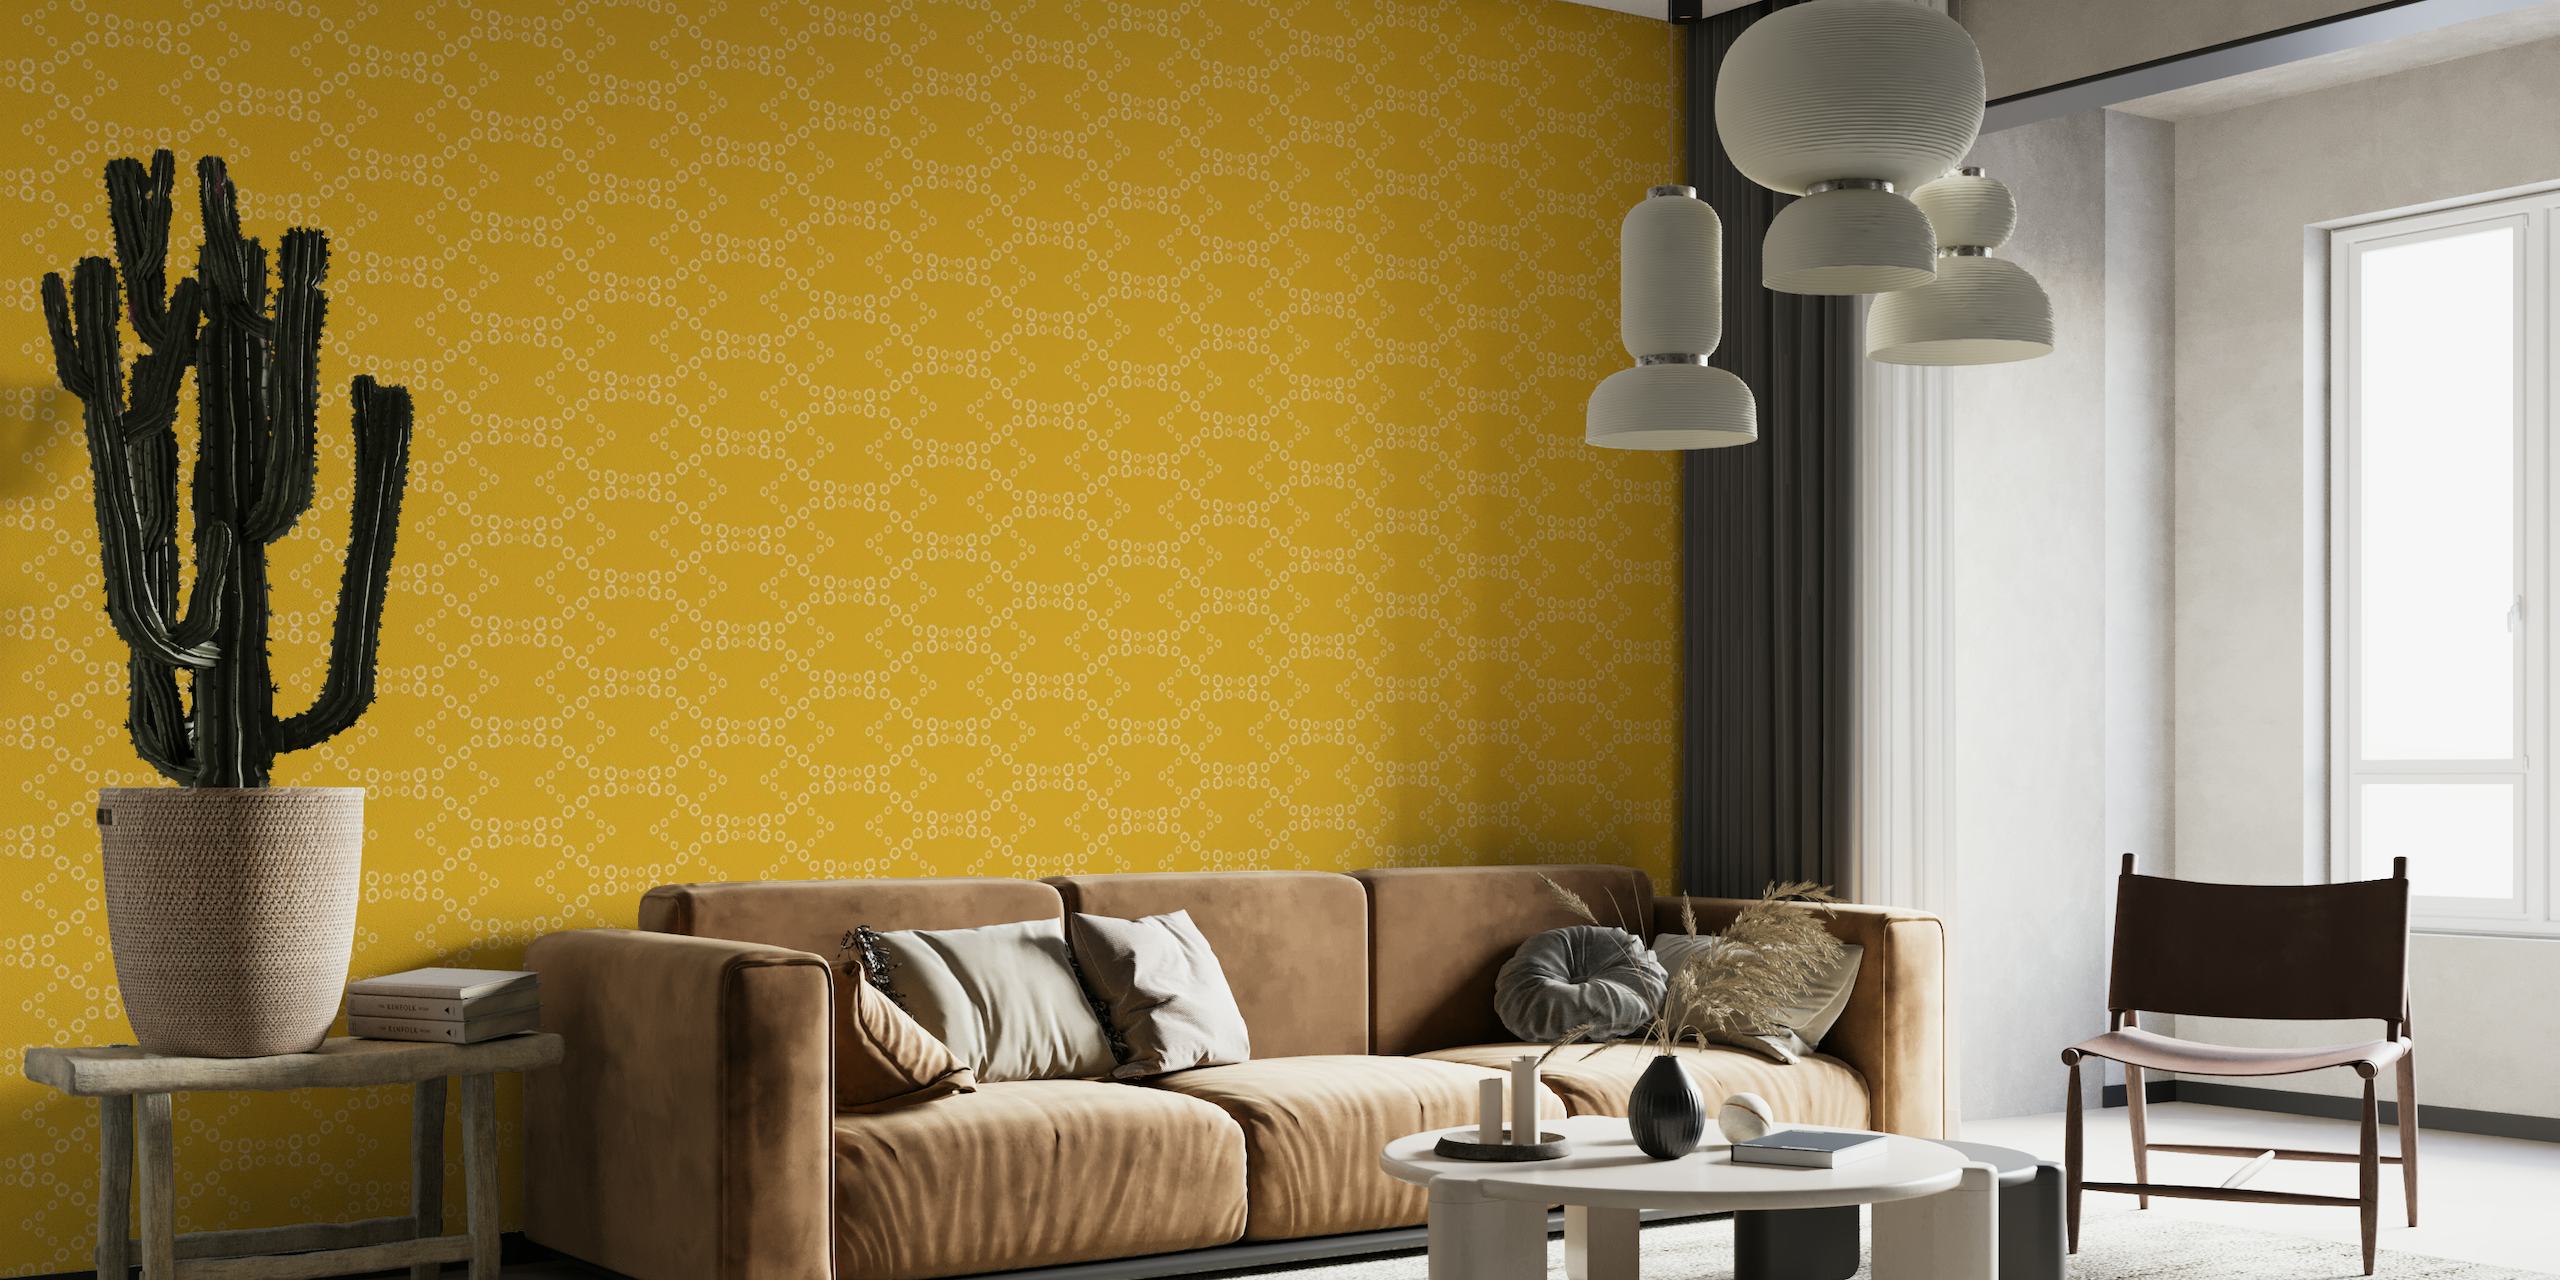 Mustard yellow wall mural with white dotted angles pattern